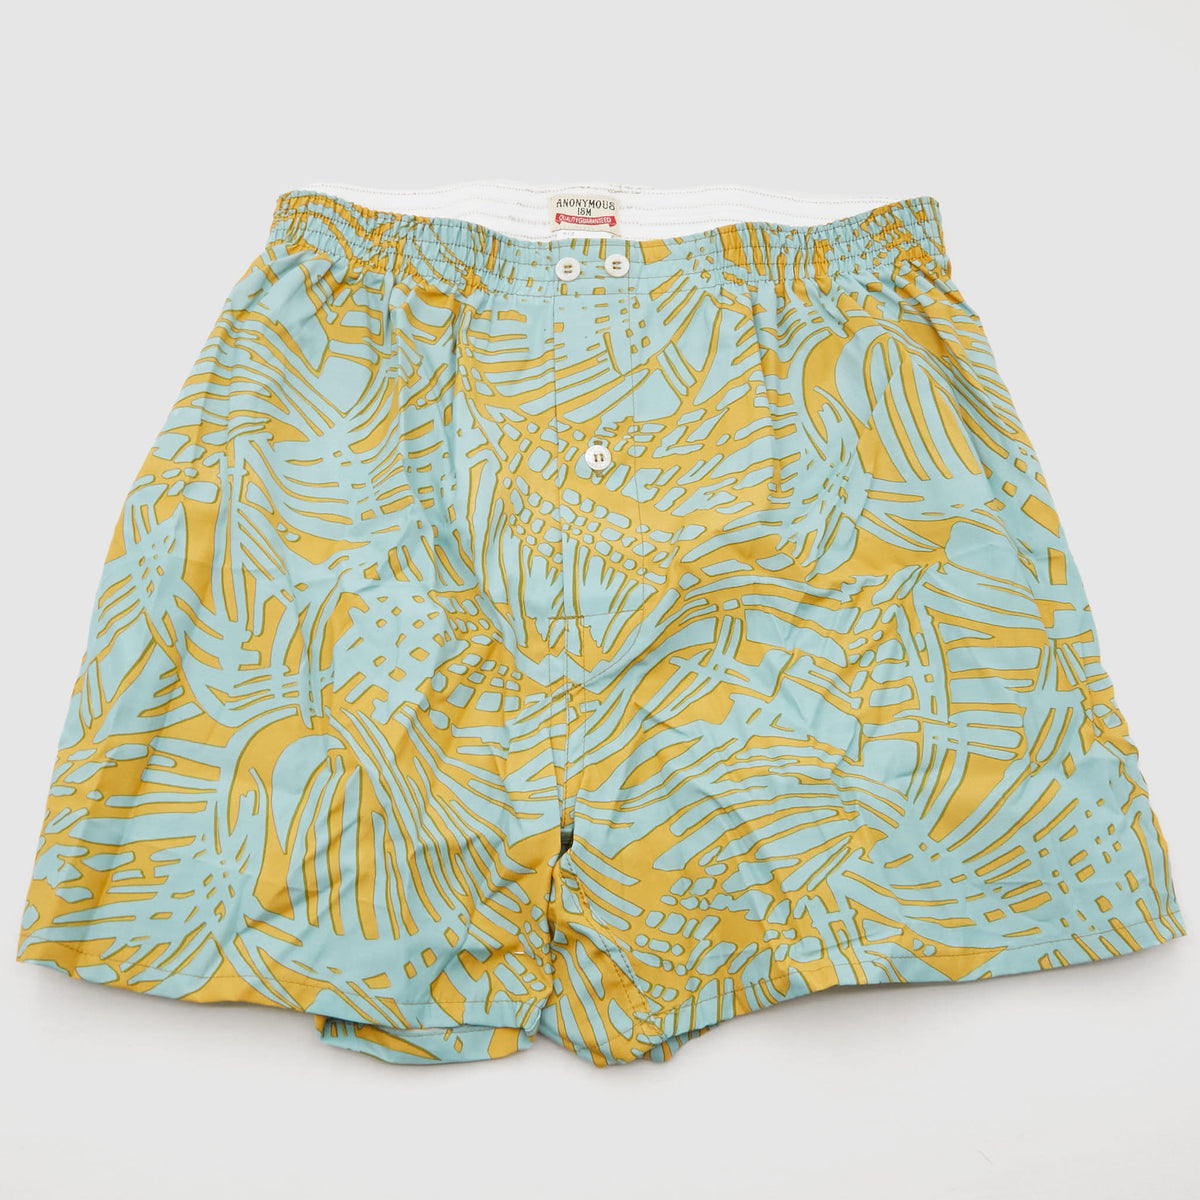 Anonymous Ism Rayon Plamtree Boxers